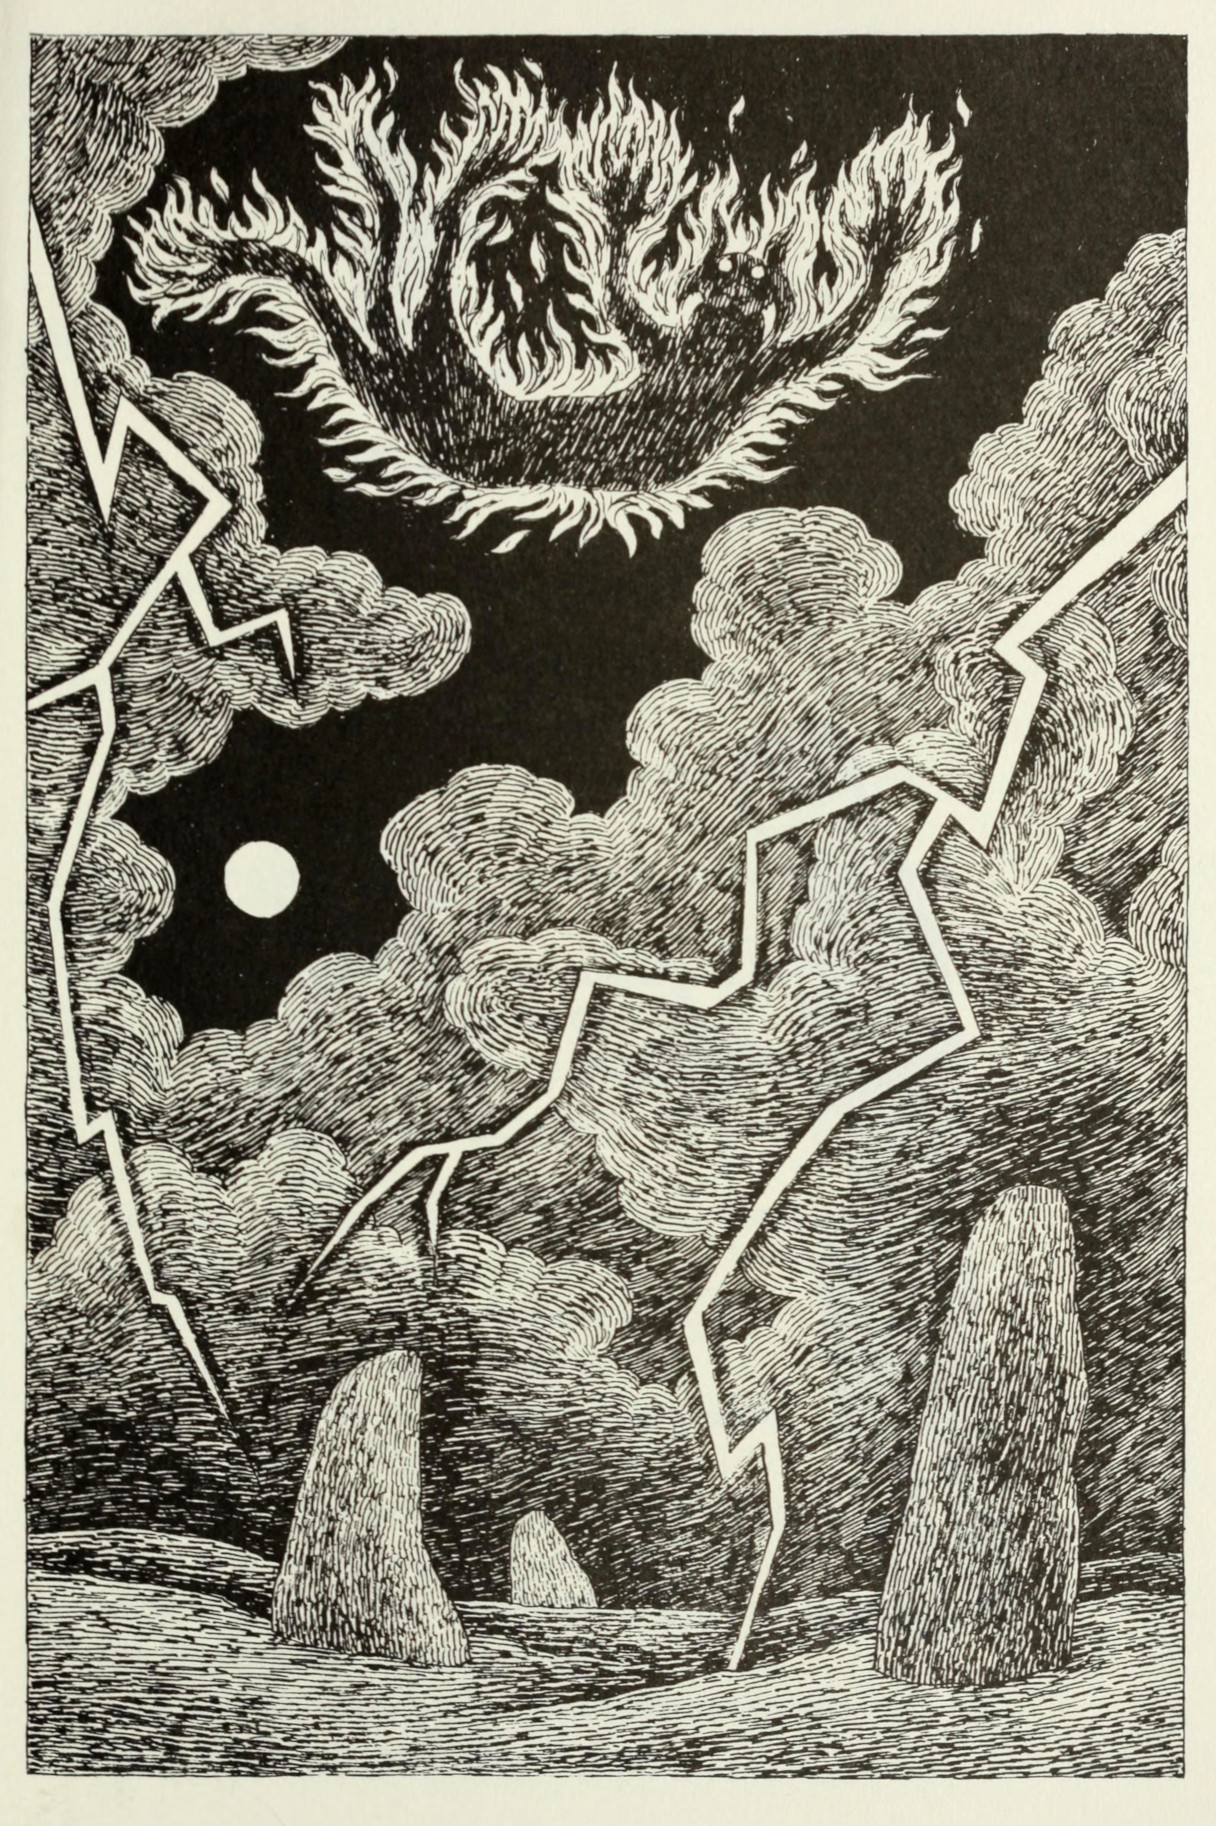 Fireforefiddle, the Fiend of the Fell by Edward Gorey (1982)